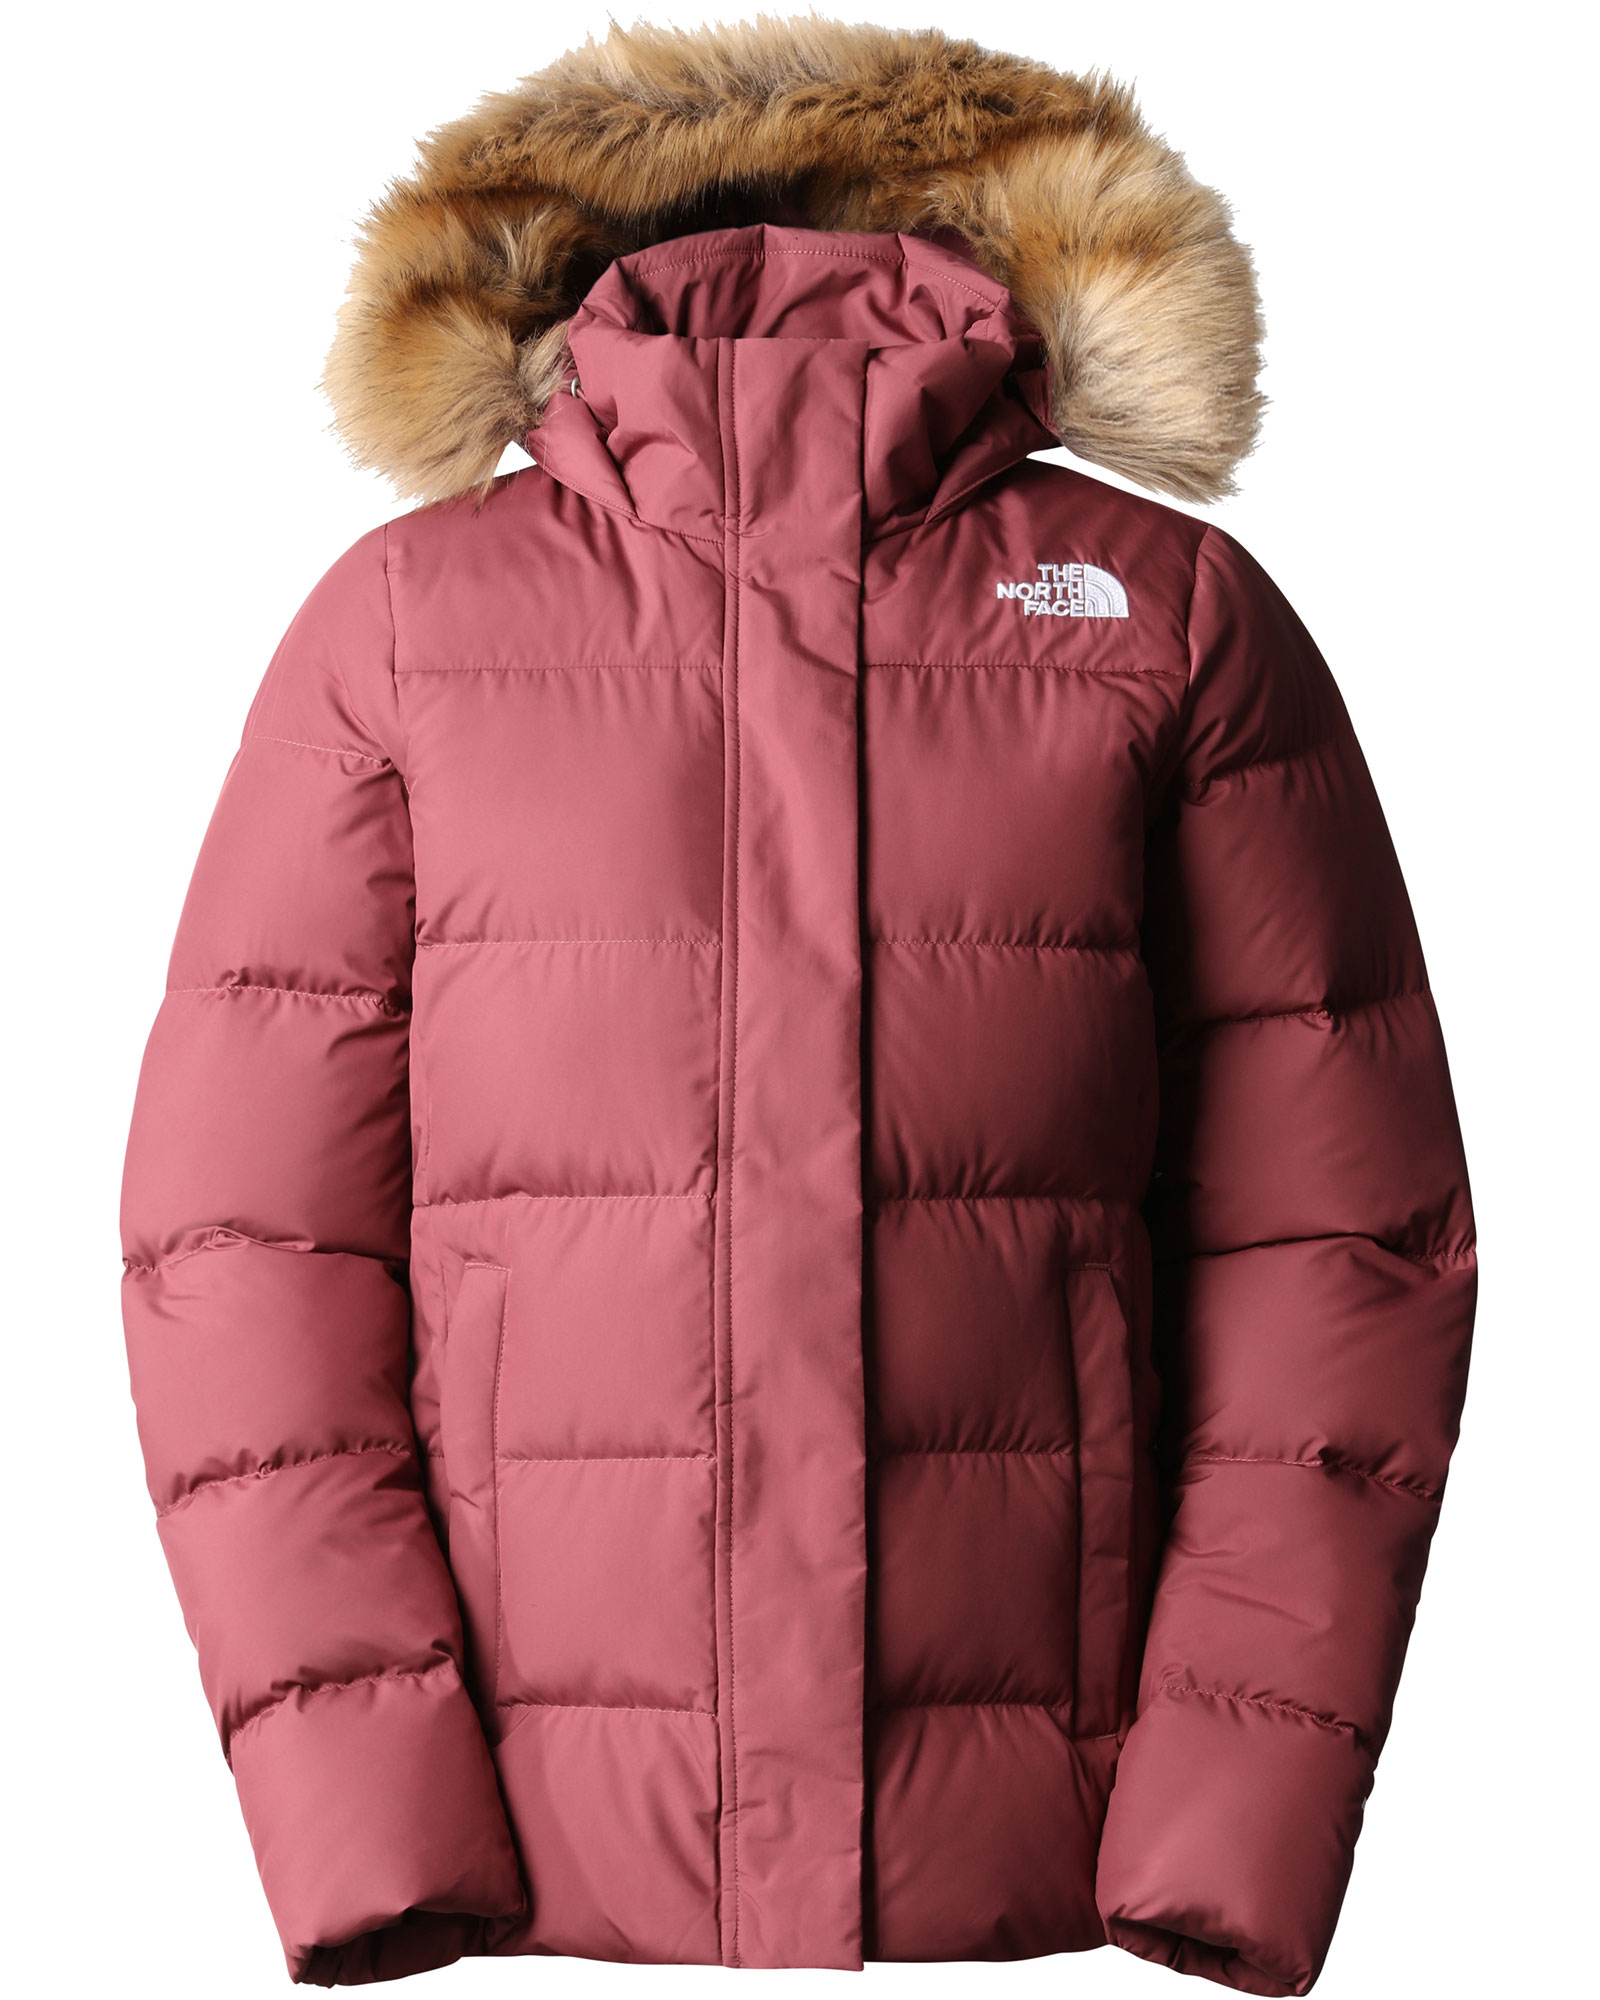 The North Face Gotham Women’s Jacket - Wild Ginger XS